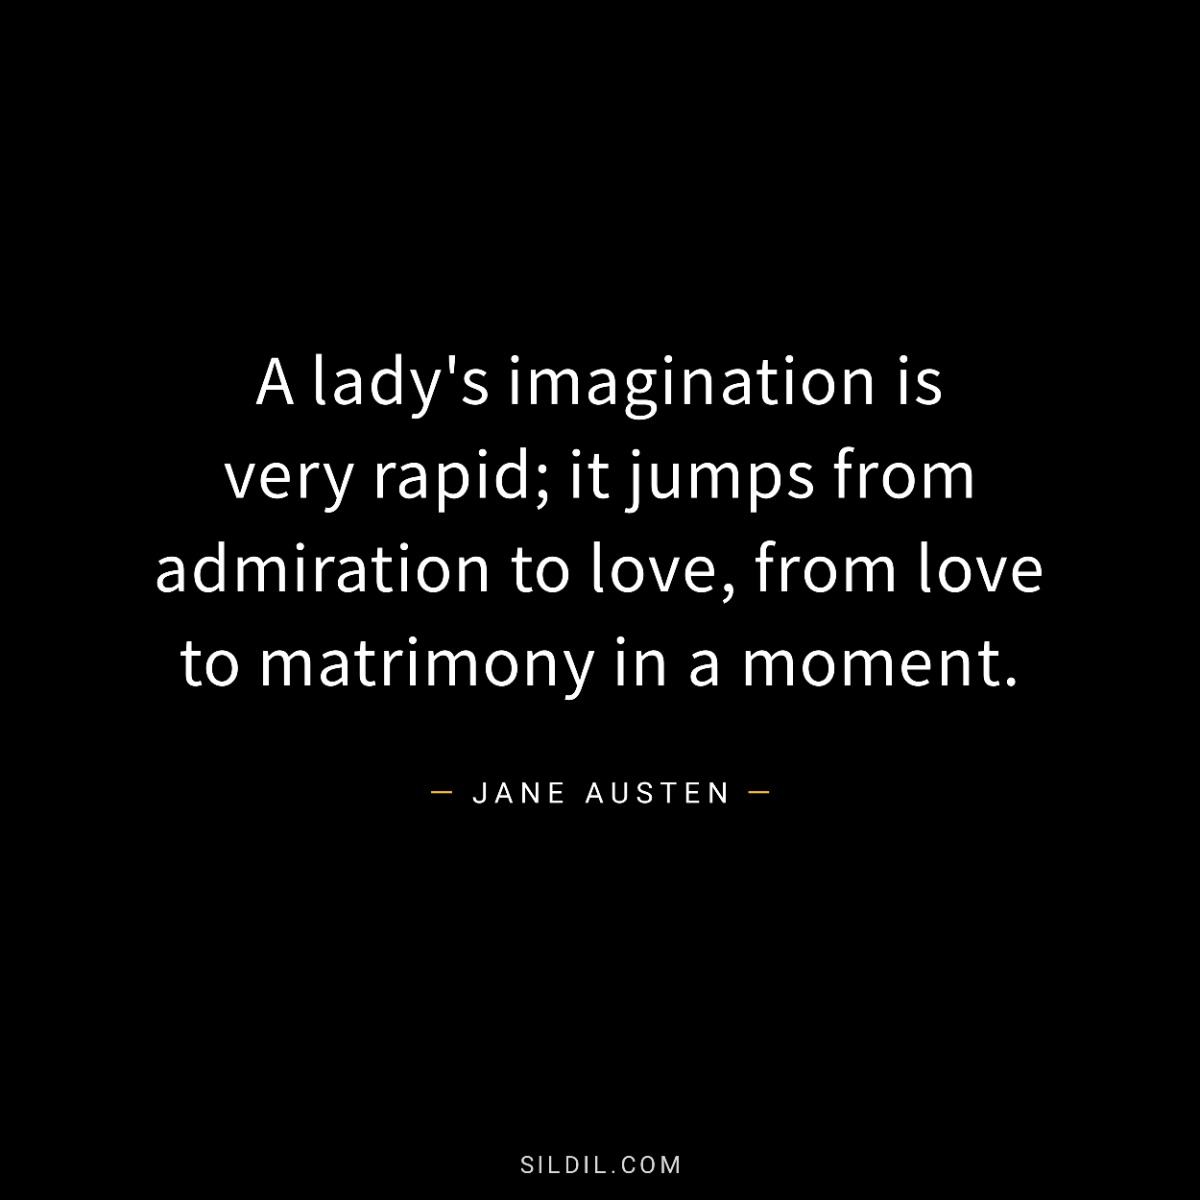 A lady's imagination is very rapid; it jumps from admiration to love, from love to matrimony in a moment.